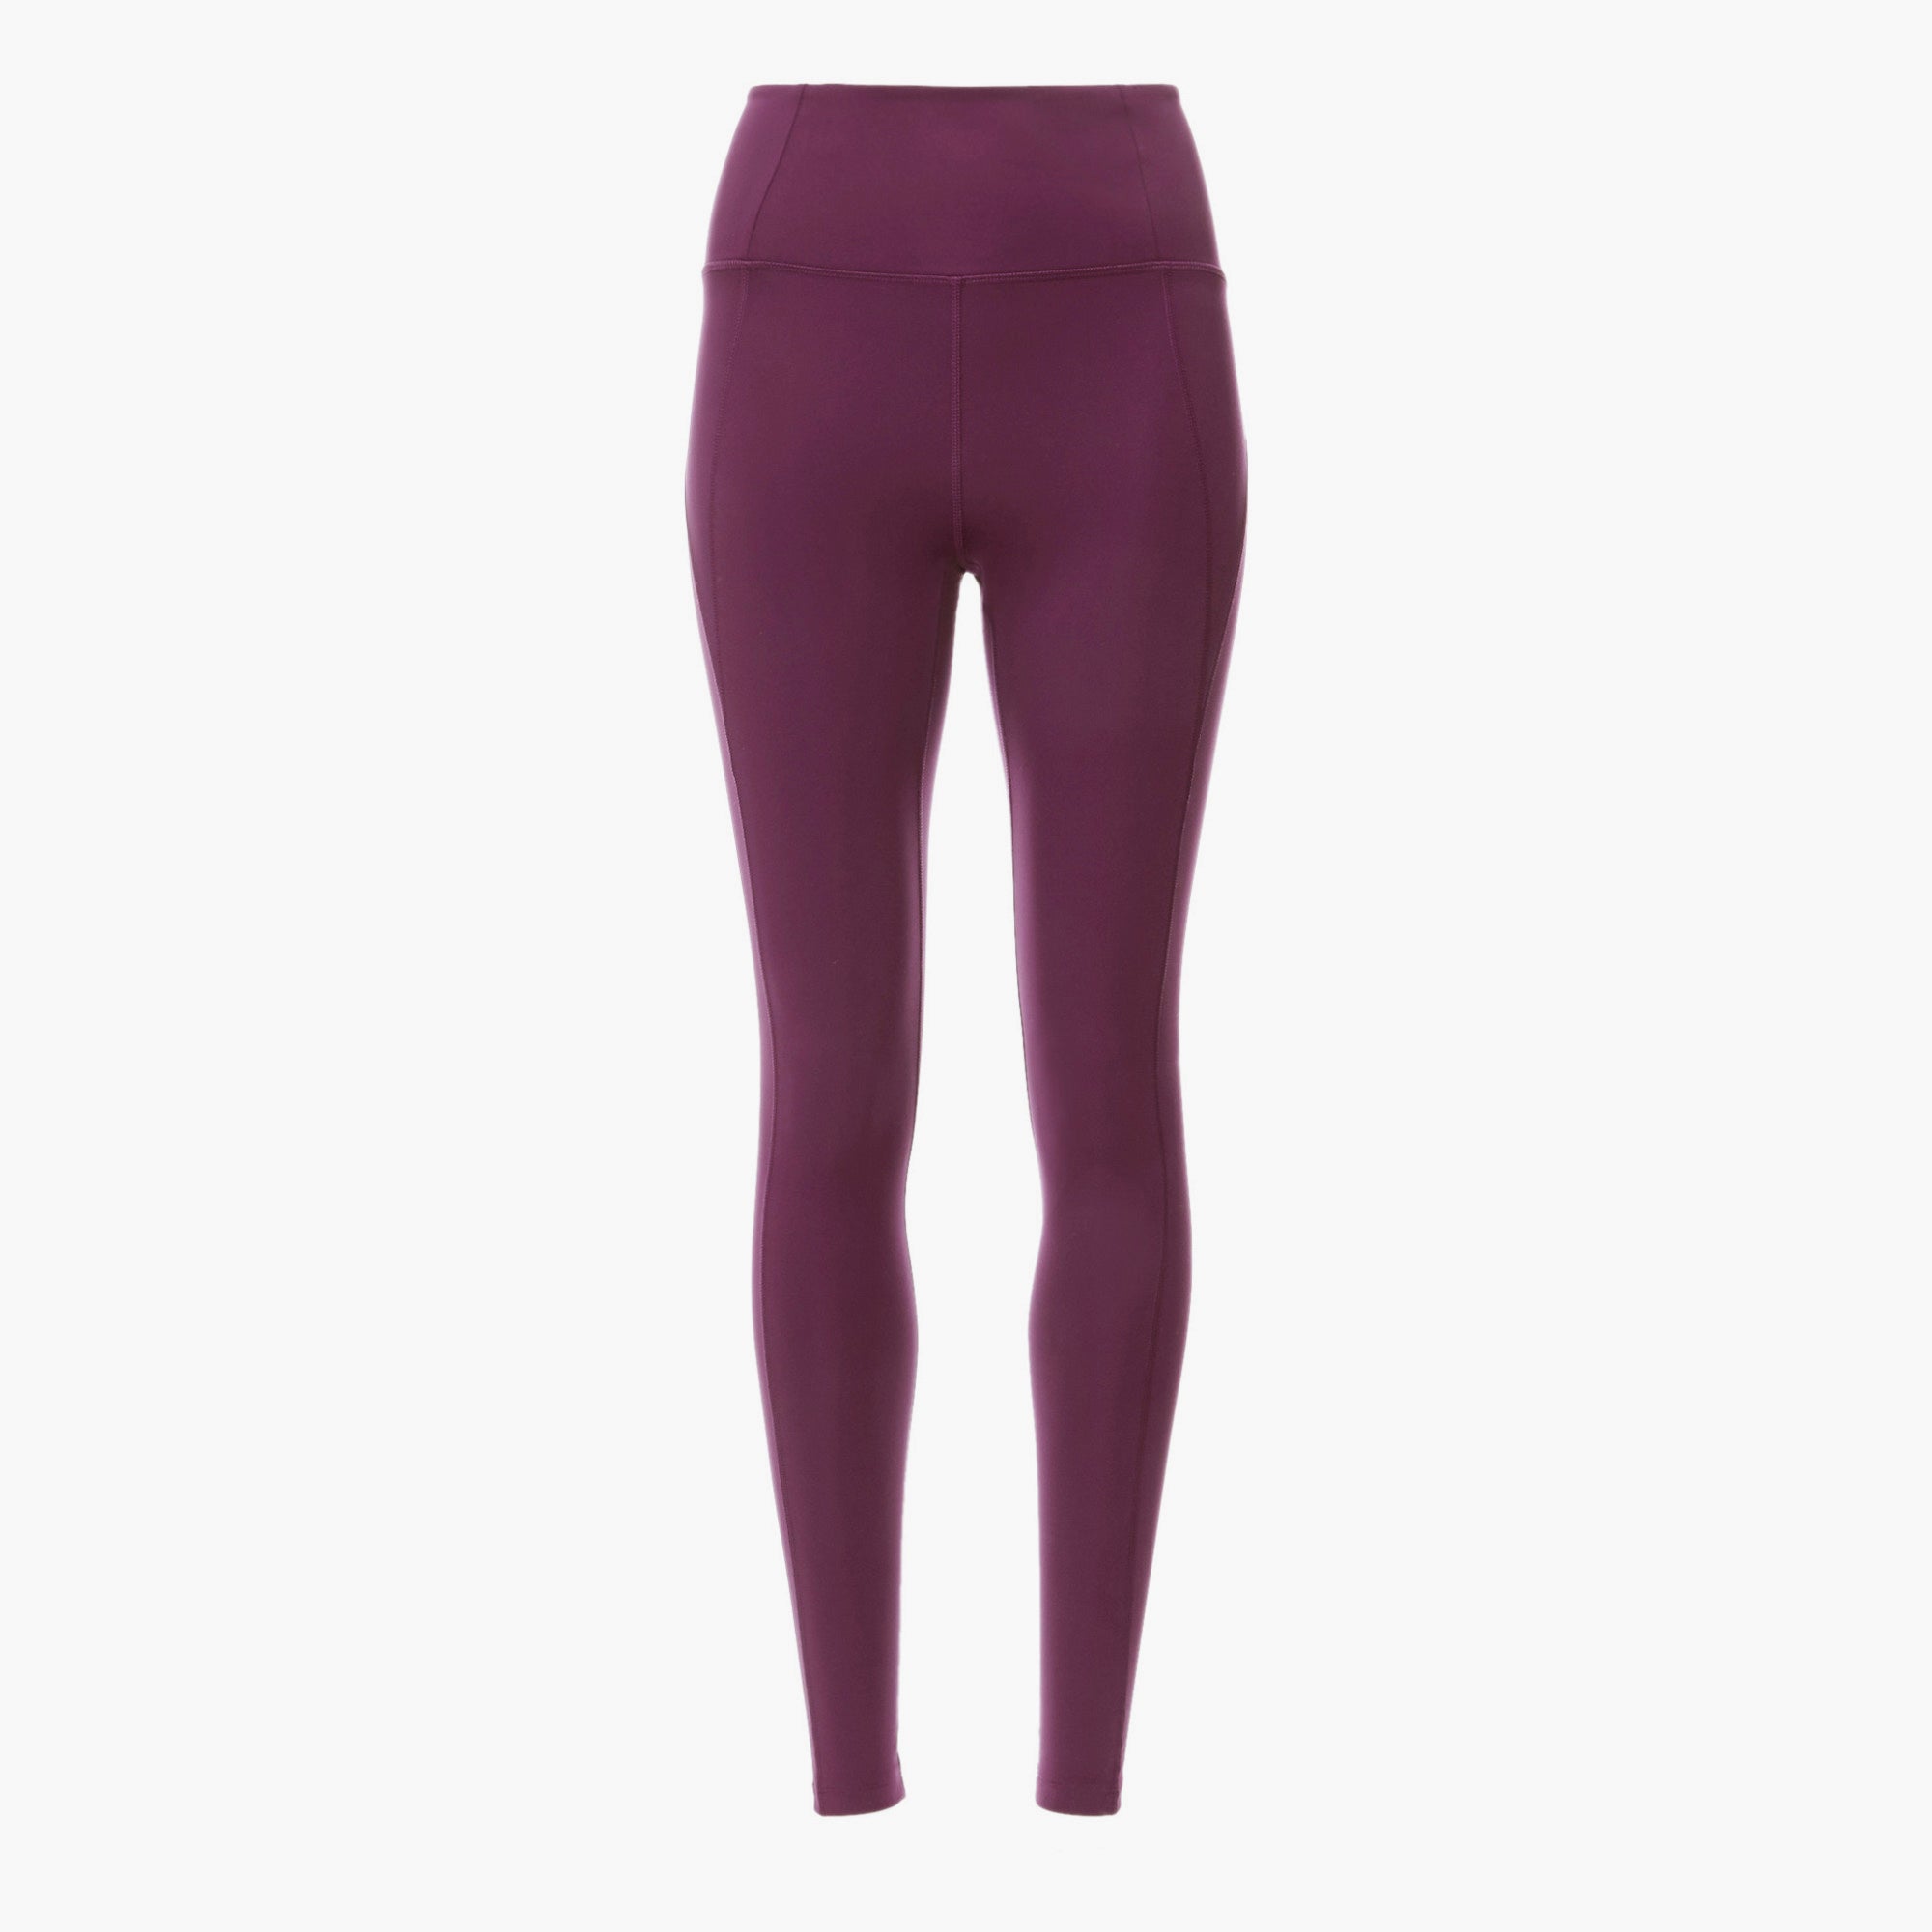 Girlfriend Collective Plum Compressive High-Rise Legging Medium - $51 -  From Kealy